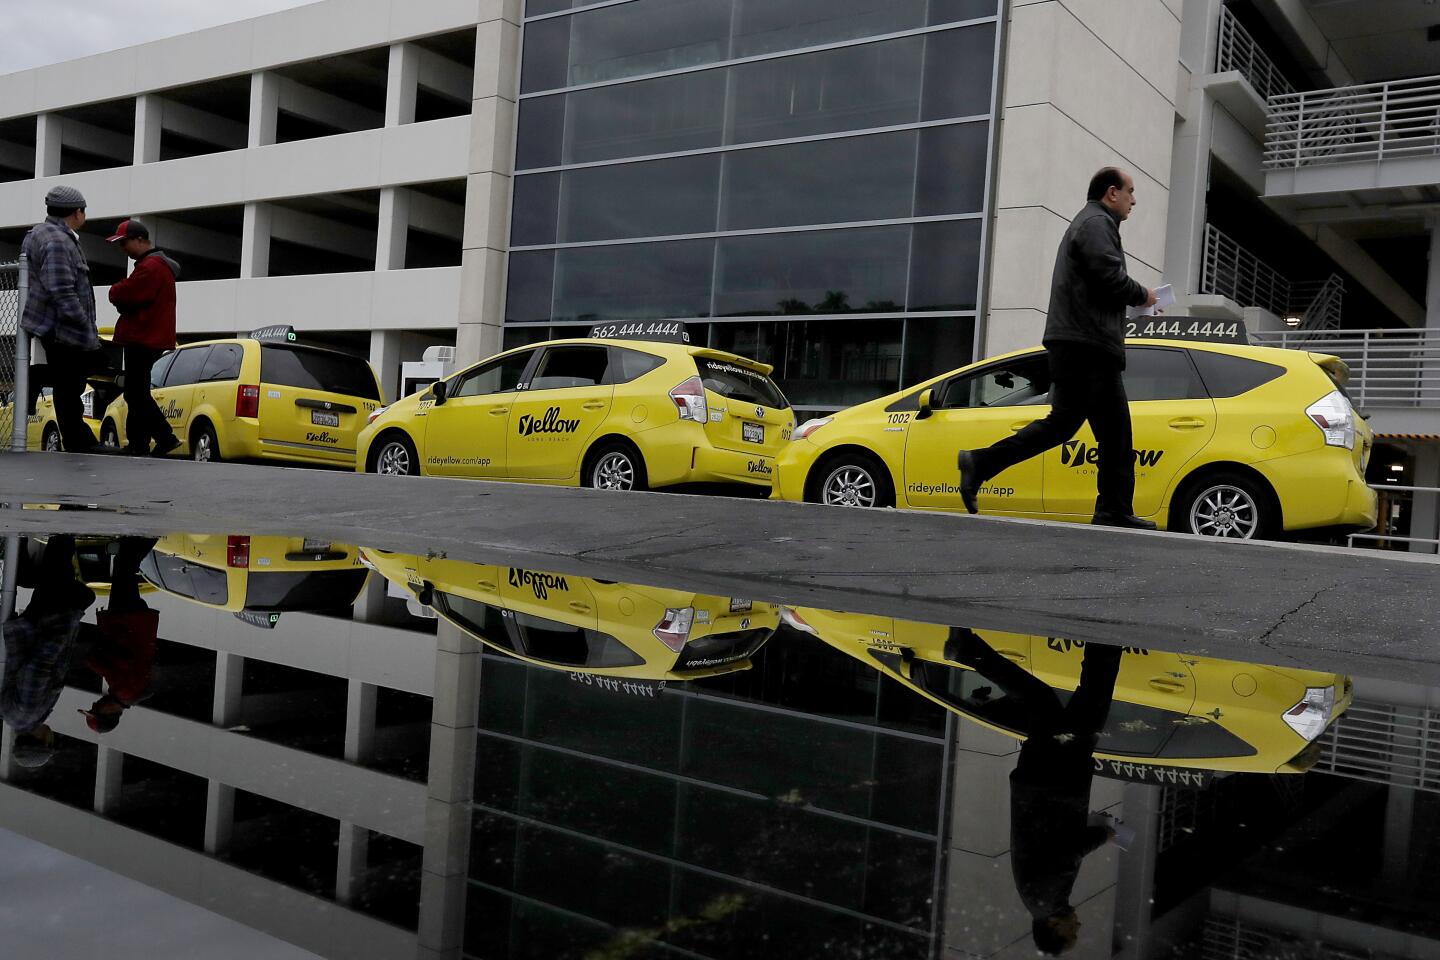 Cab drivers wait for riders at the Long Beach Airport.